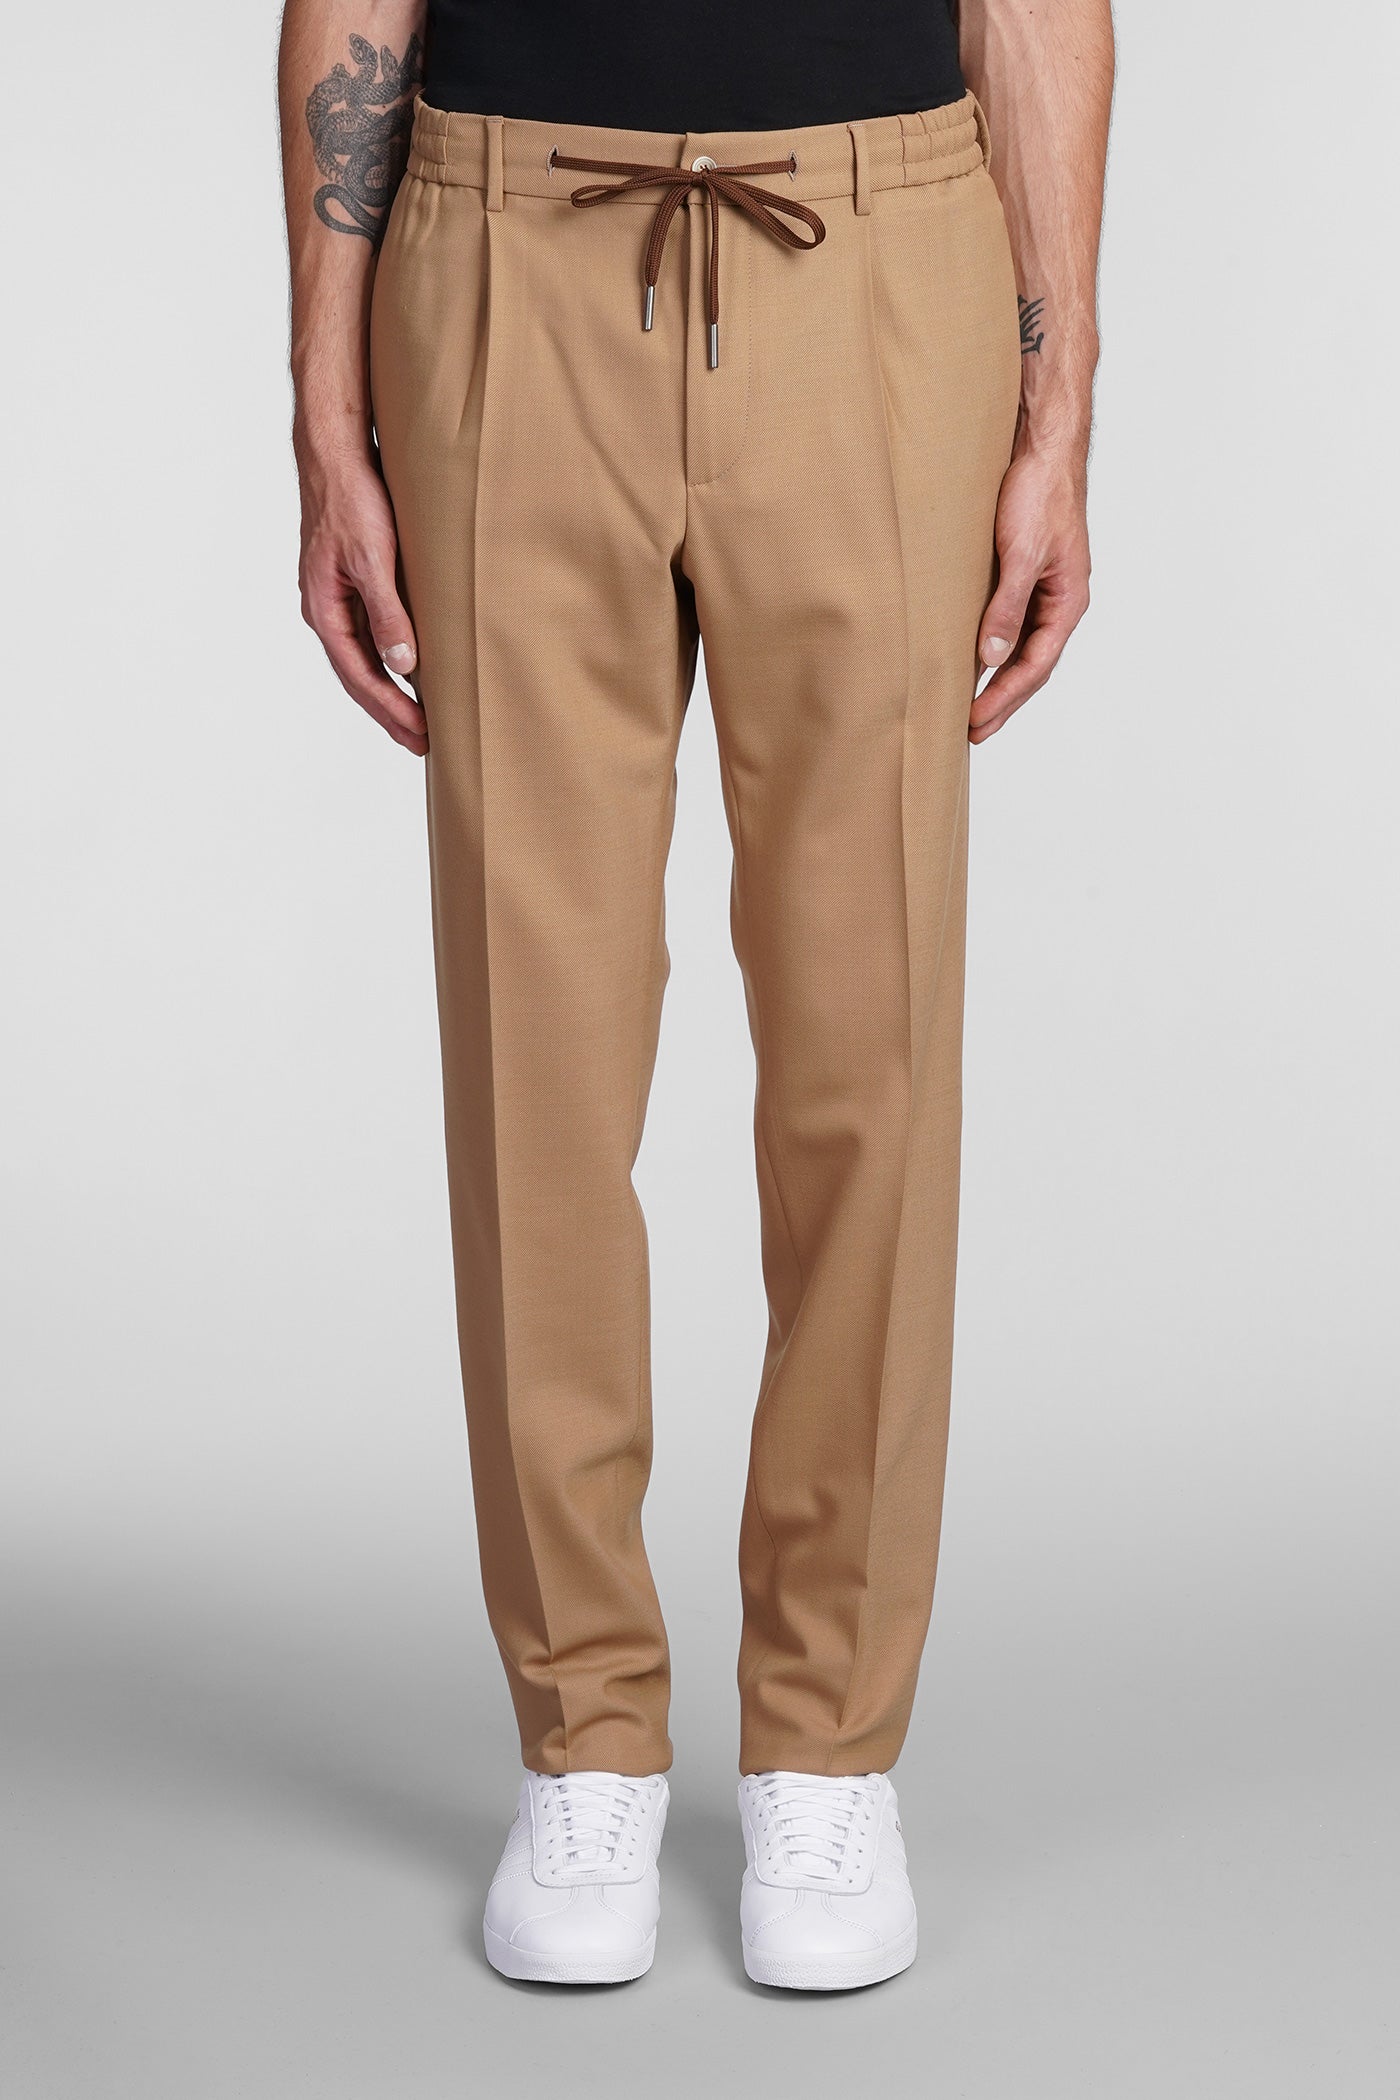 Tagliatore 0205 - Pants in Camel polyester